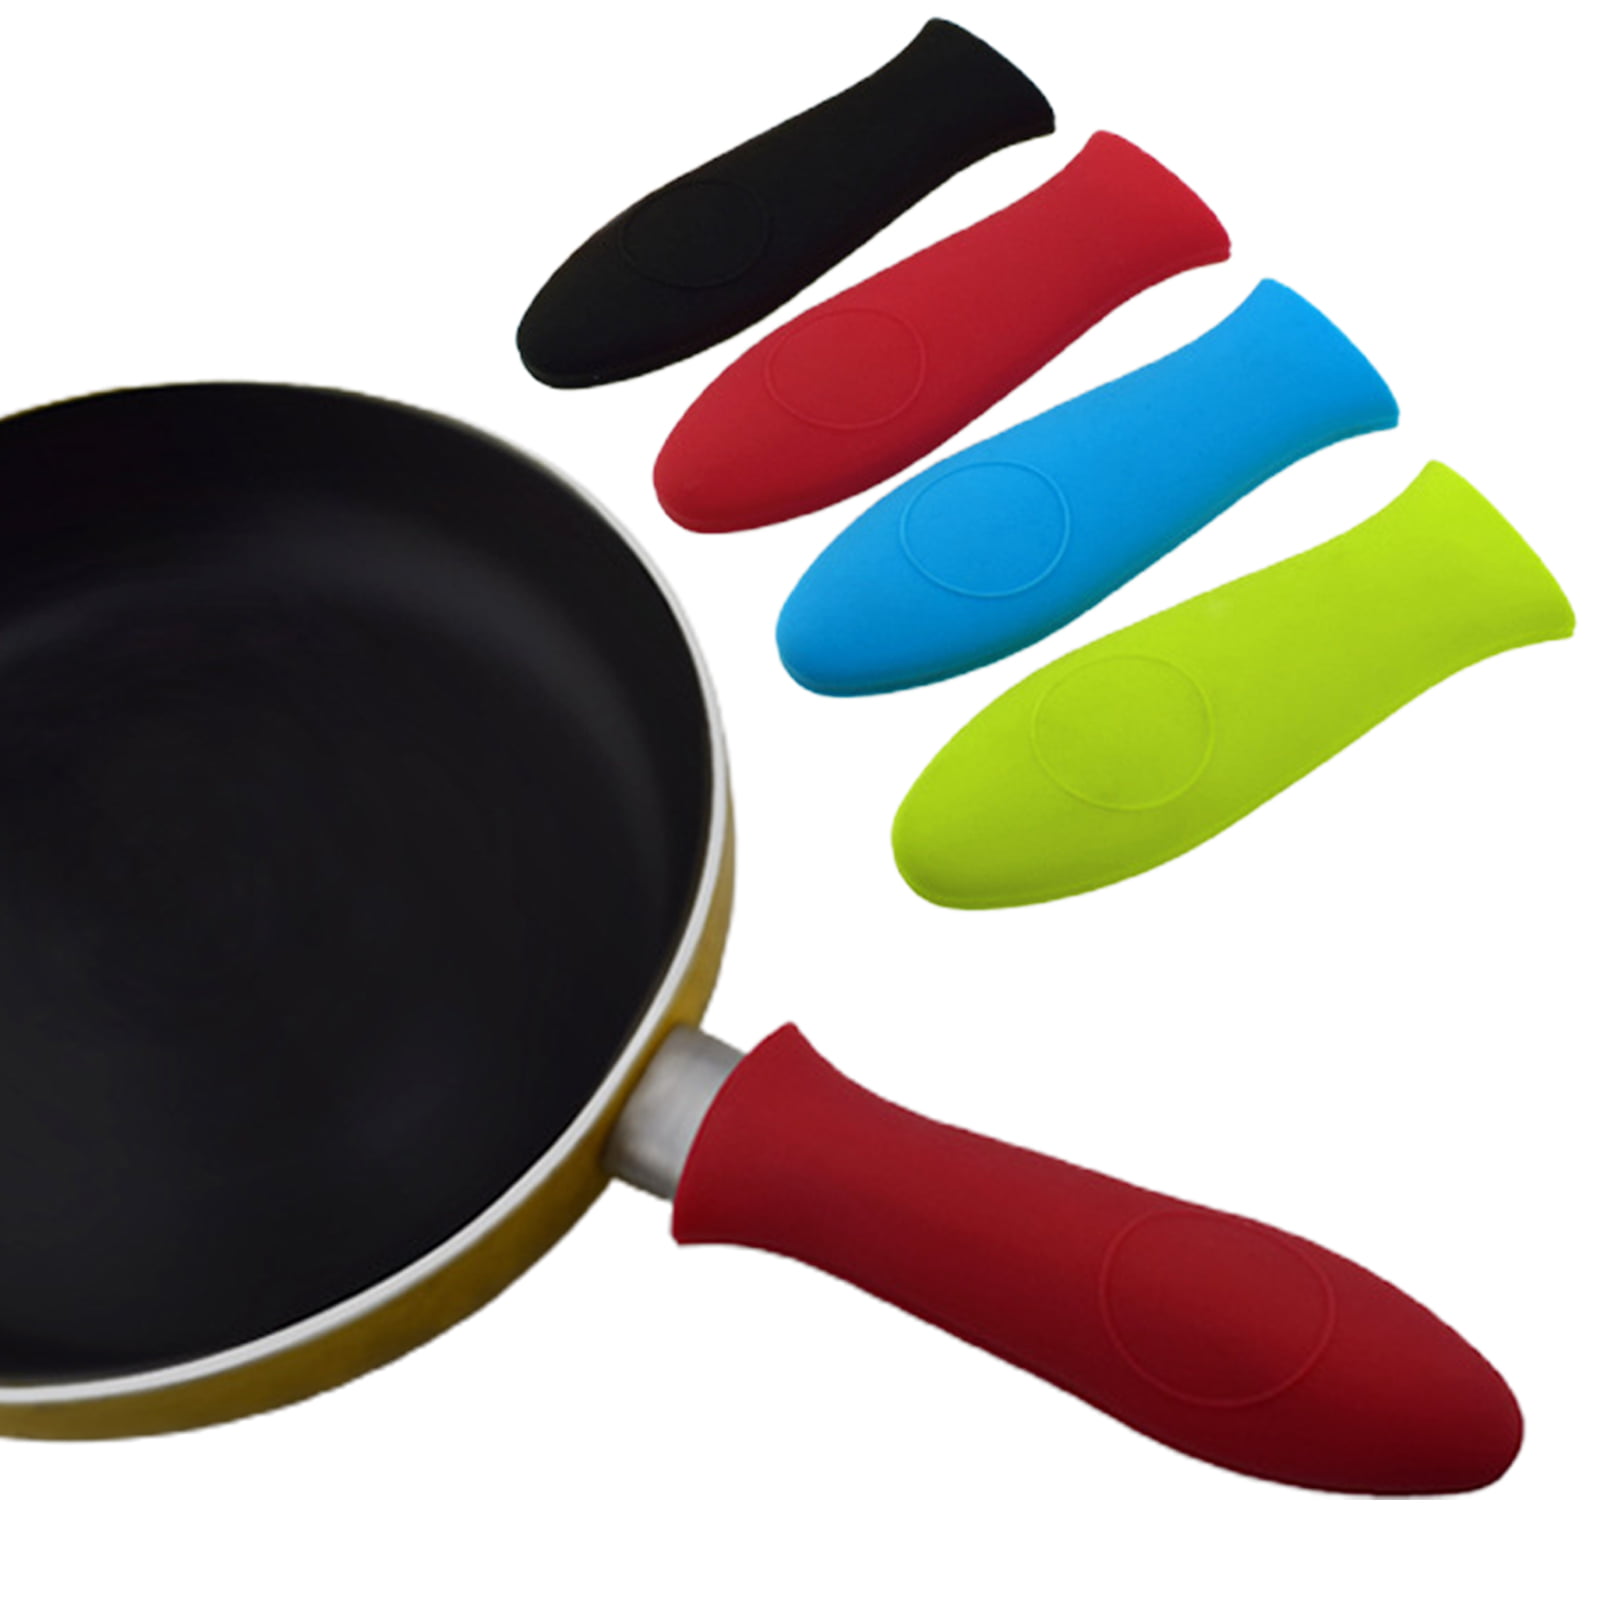 Travelwant 4Pcs Silicone Hot Handle Holder, Cast Iron Handle Cover,  Extra-Thick Silicone Heat Resistant Pot Holder Sleeve Cast Iron Skillet  Handle Covers for Pans, Skillets 